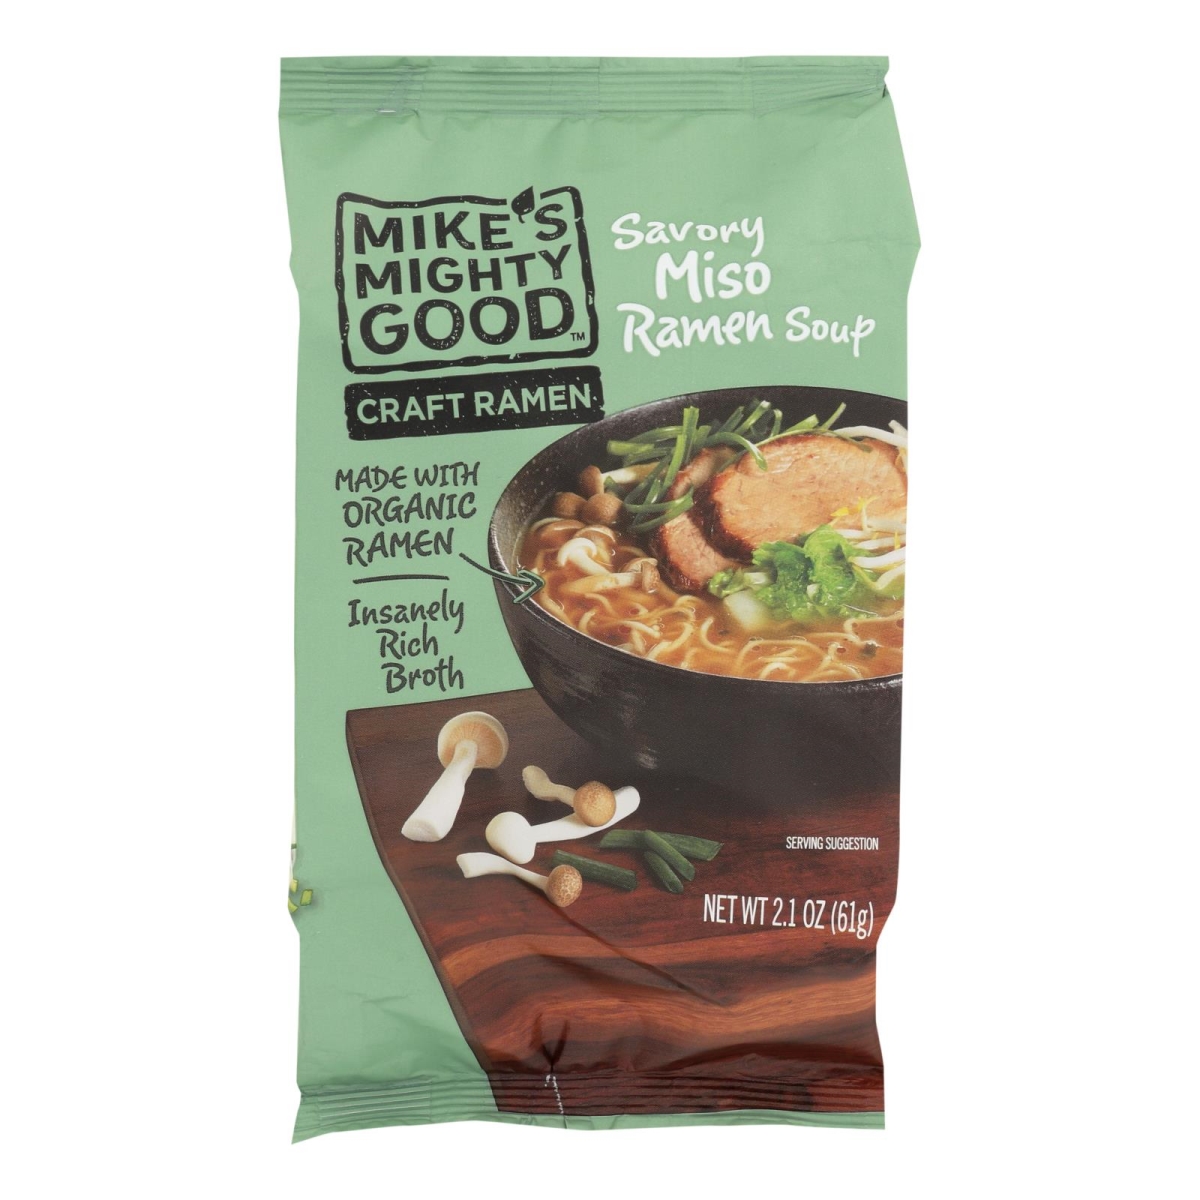 Picture of Mikes Mighty Good HG2257798 2.1 oz Savory Miso Ramen Soup - Case of 7